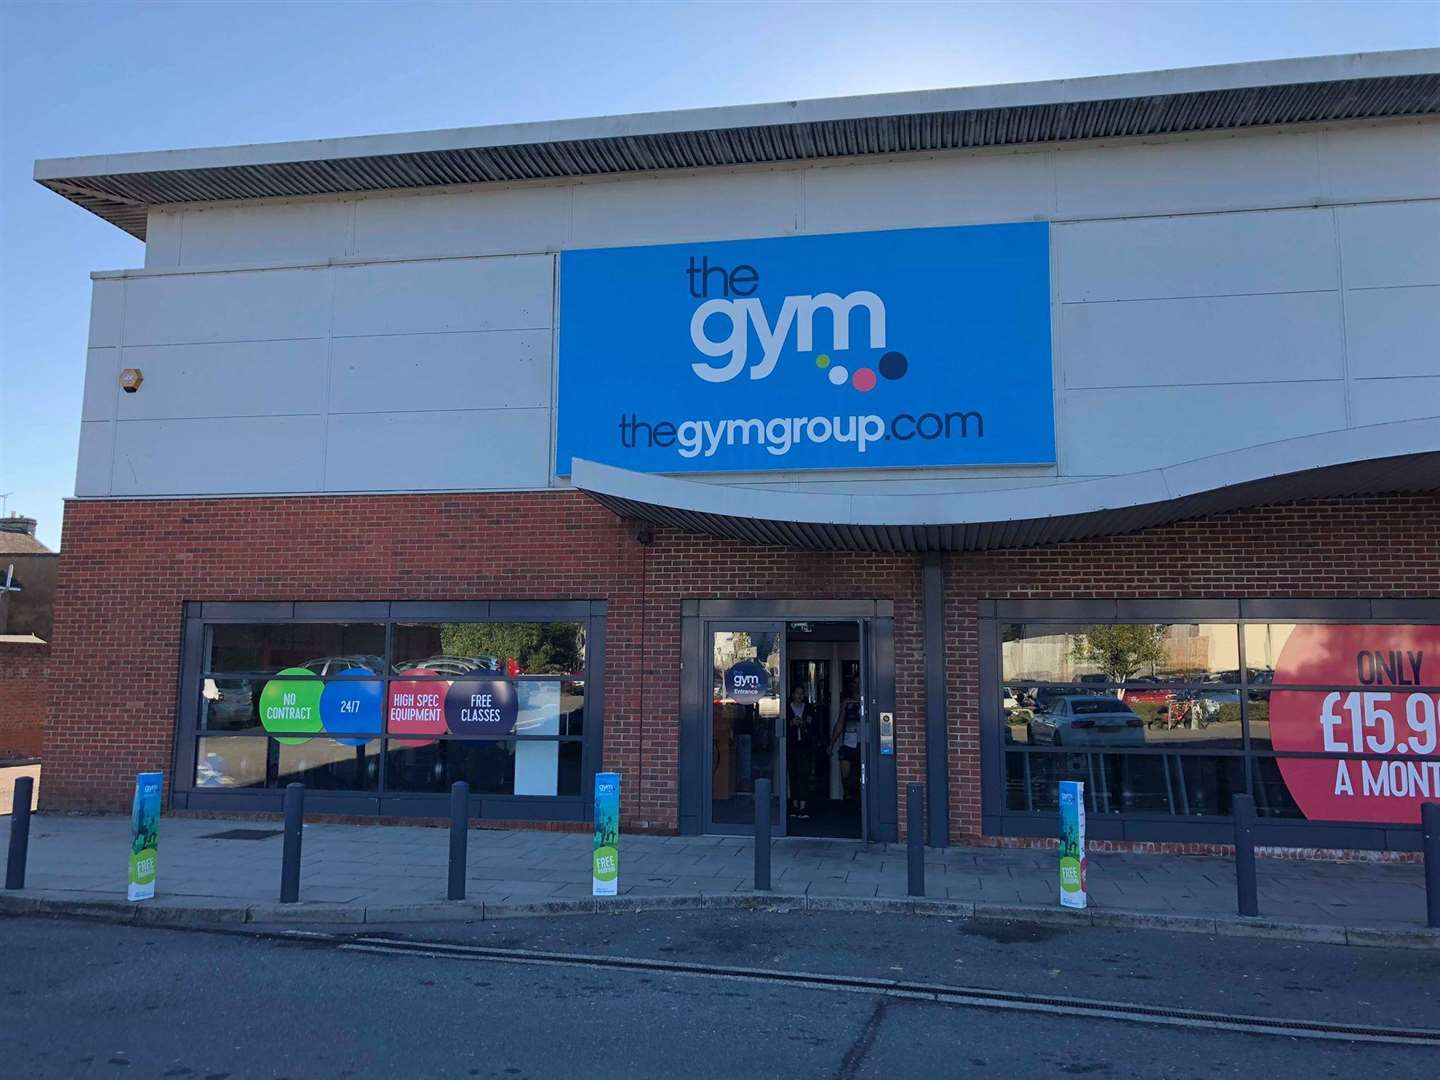 The Gym in New Street was evacuated